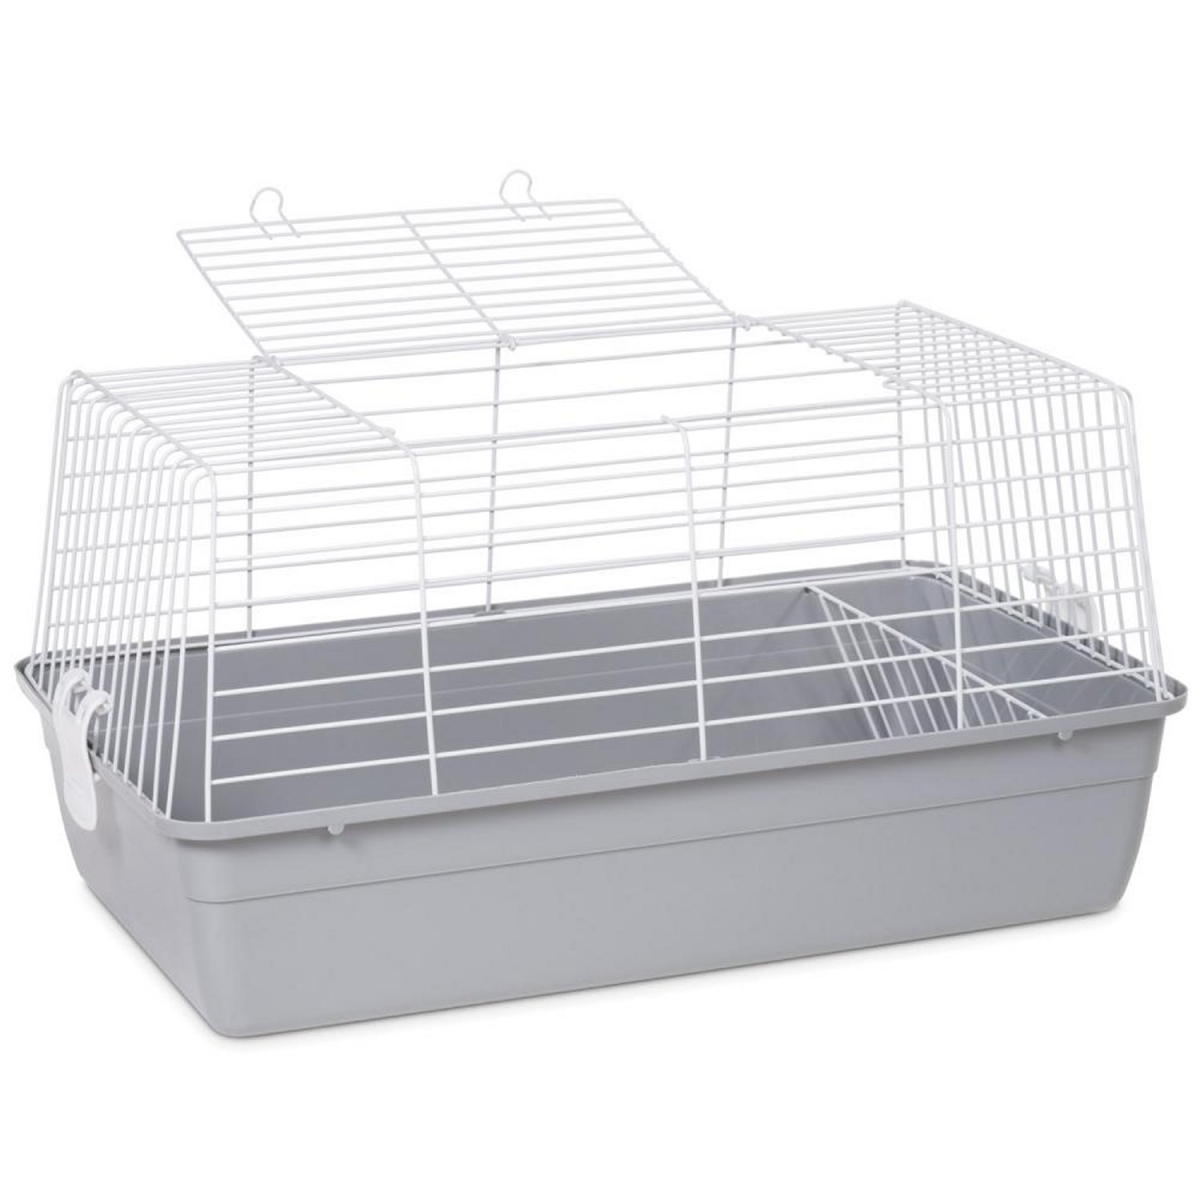 Picture of Prevue Pet Products PP-SP526G Carina Small Animal Cage - Gray